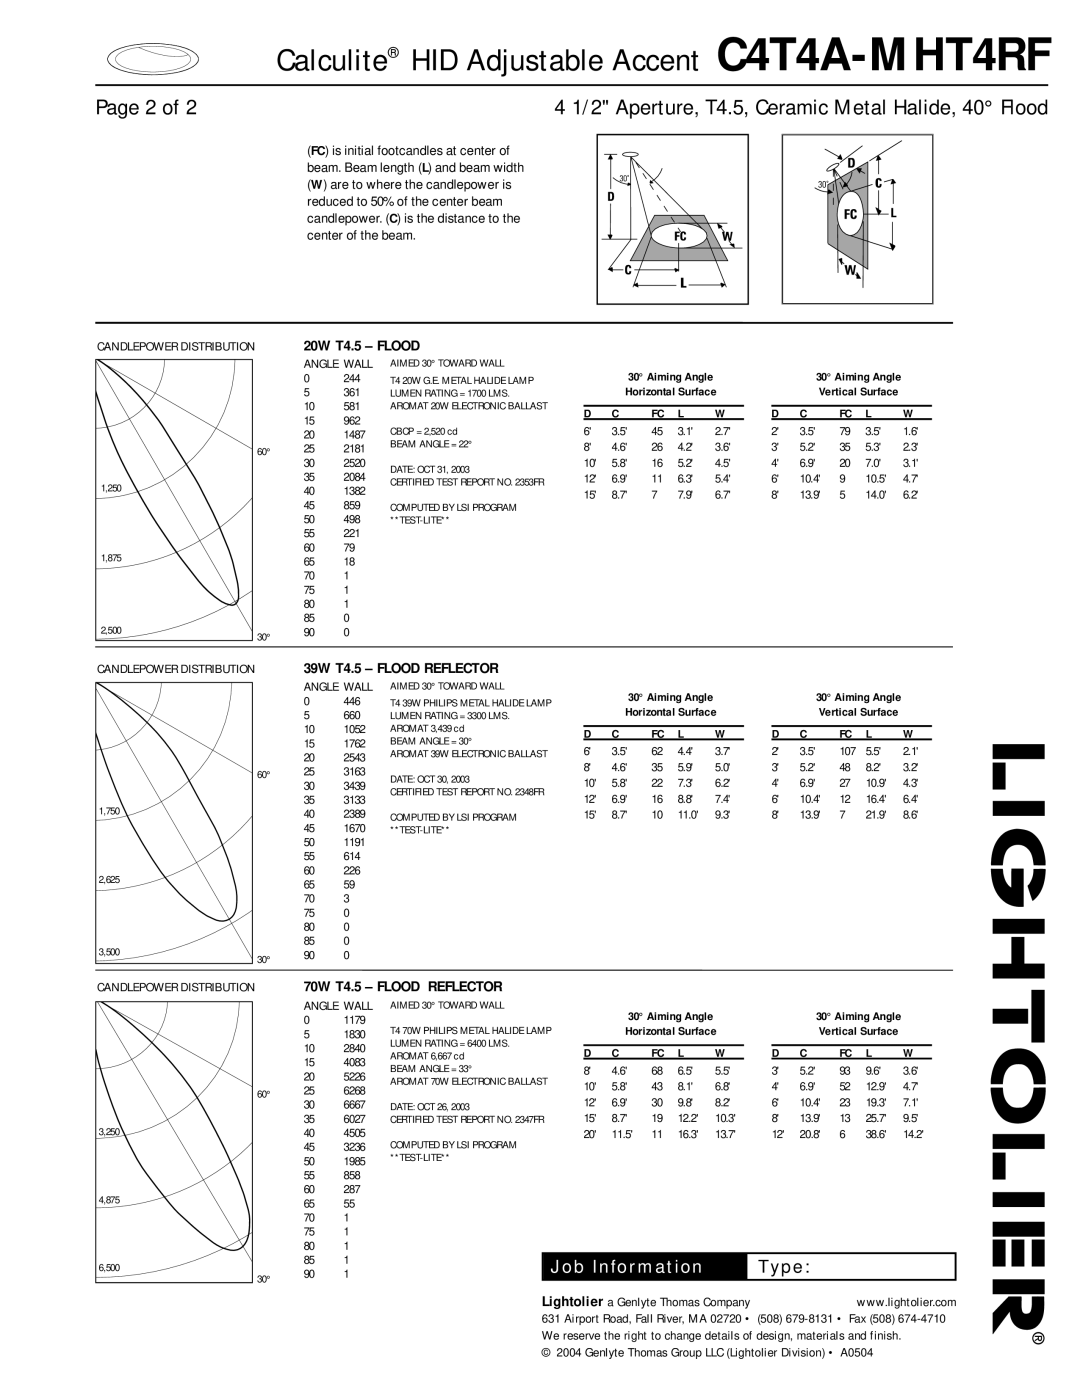 Lightolier manual Page 2 of, Calculite HID Adjustable Accent C4T4A-MHT4RF, Job Information, Type, 20W T4.5 - FLOOD 